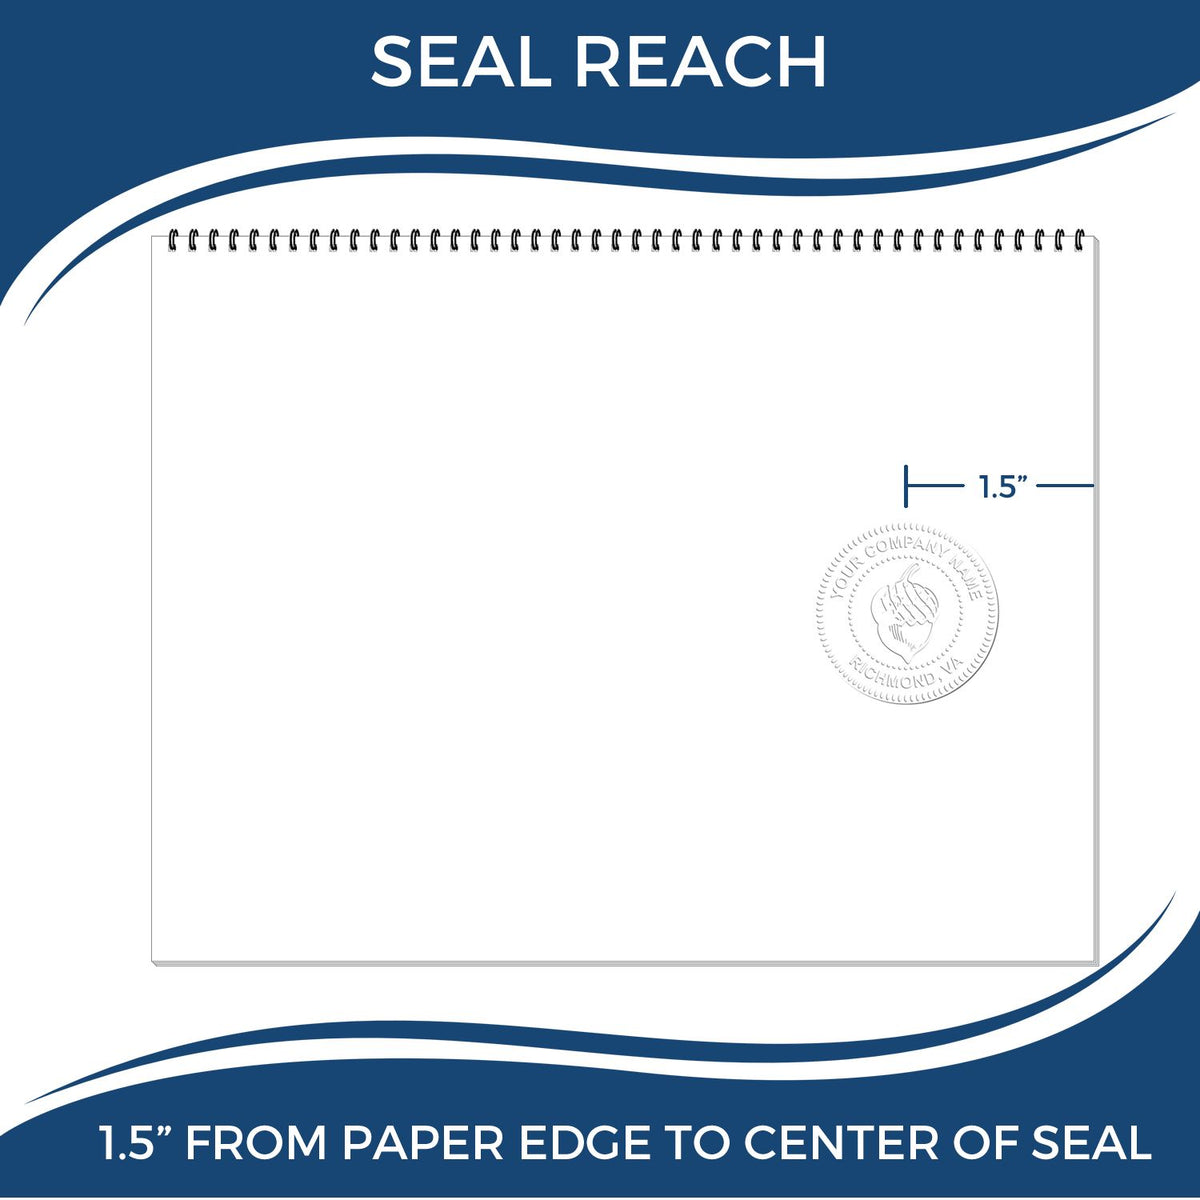 An infographic showing the seal reach which is represented by a ruler and a miniature seal image of the State of Georgia Soft Land Surveyor Embossing Seal